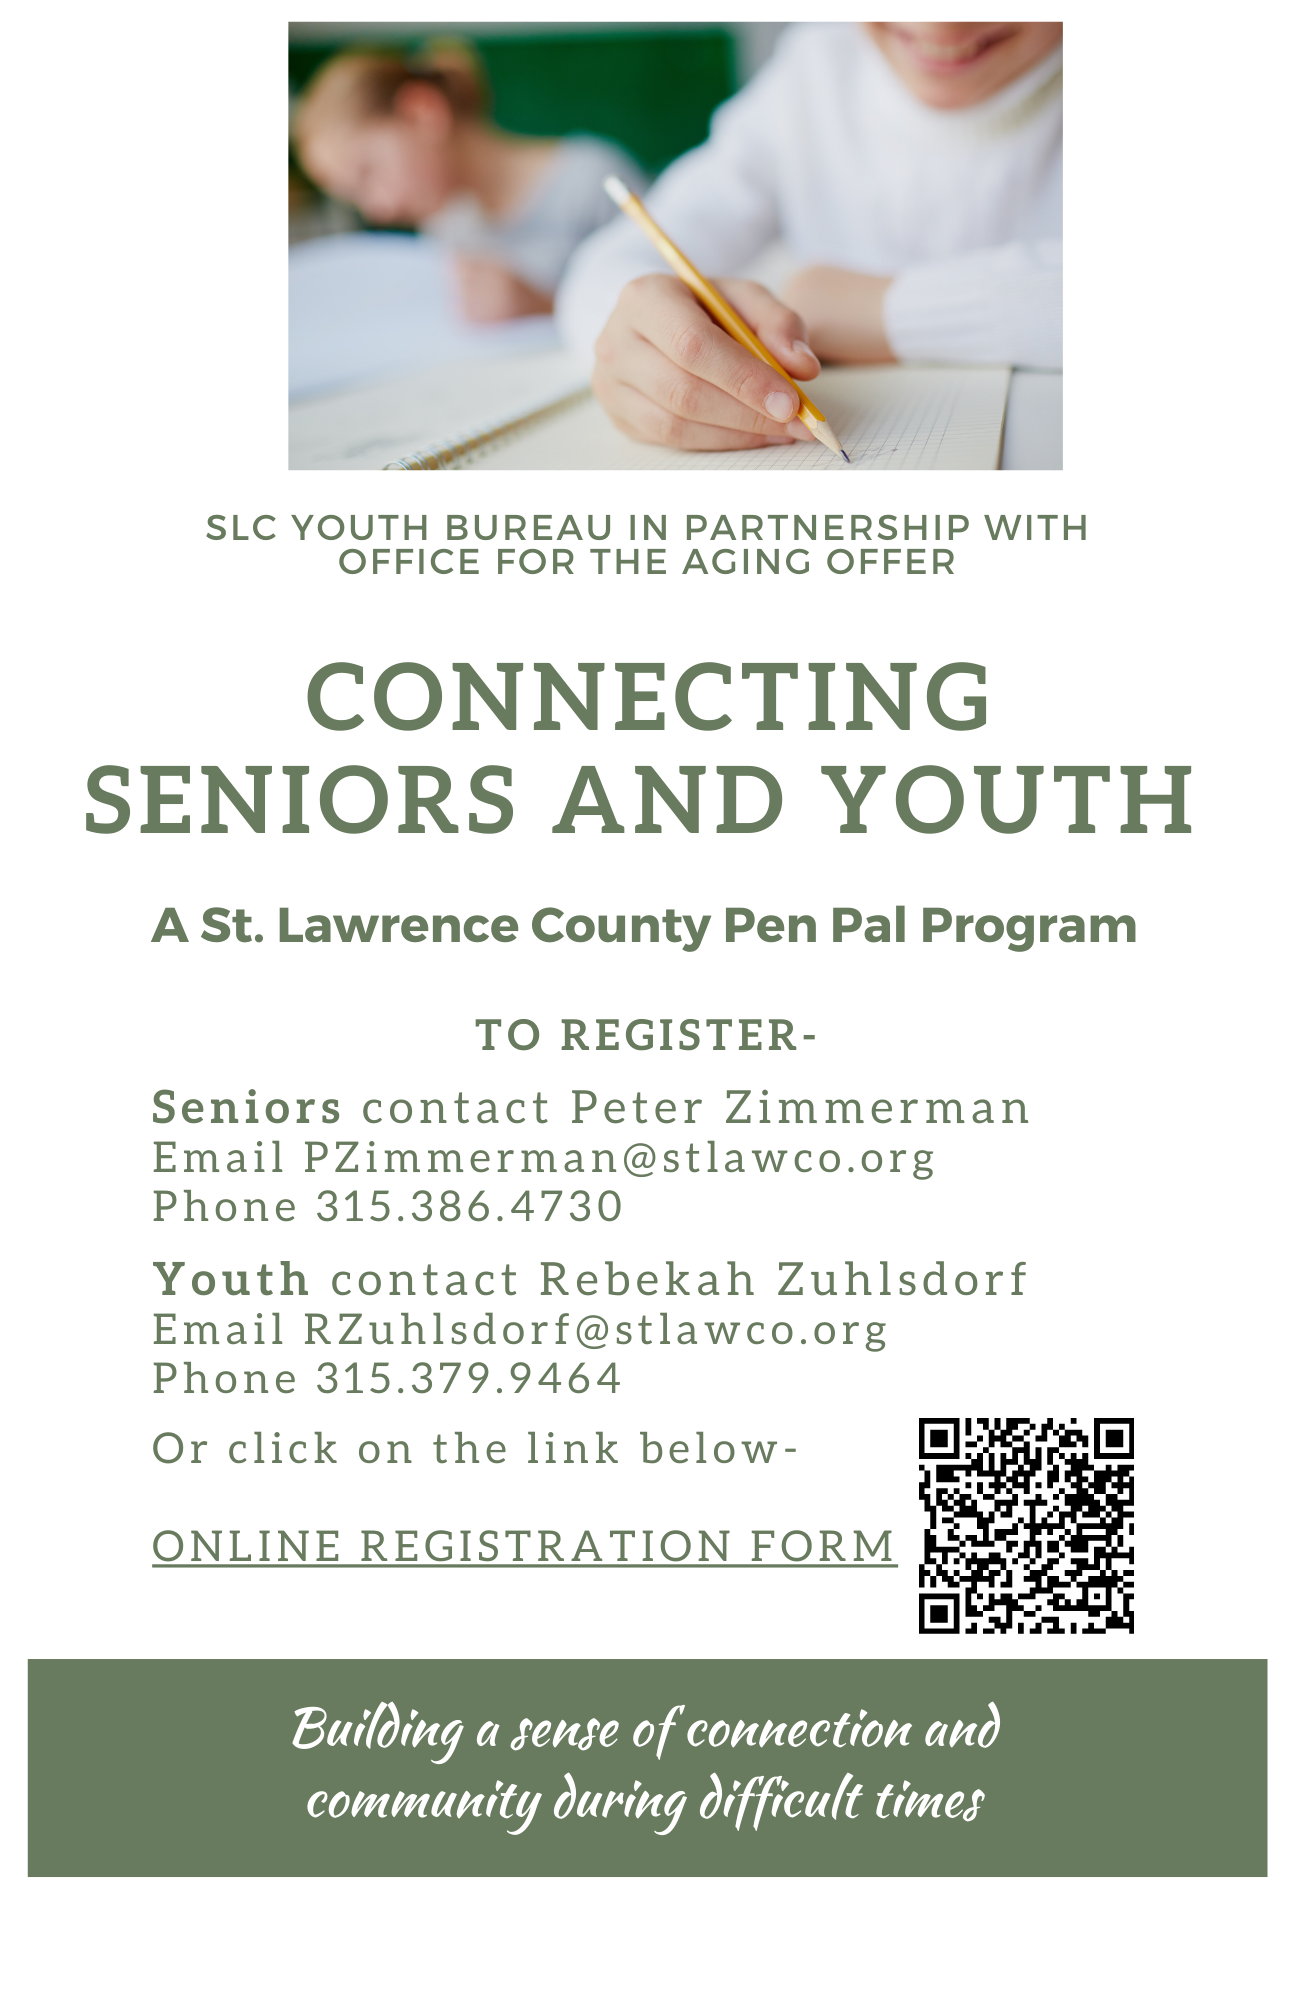 Connecting Seniors & Youth - A St. Lawrence County Pen Pal Program